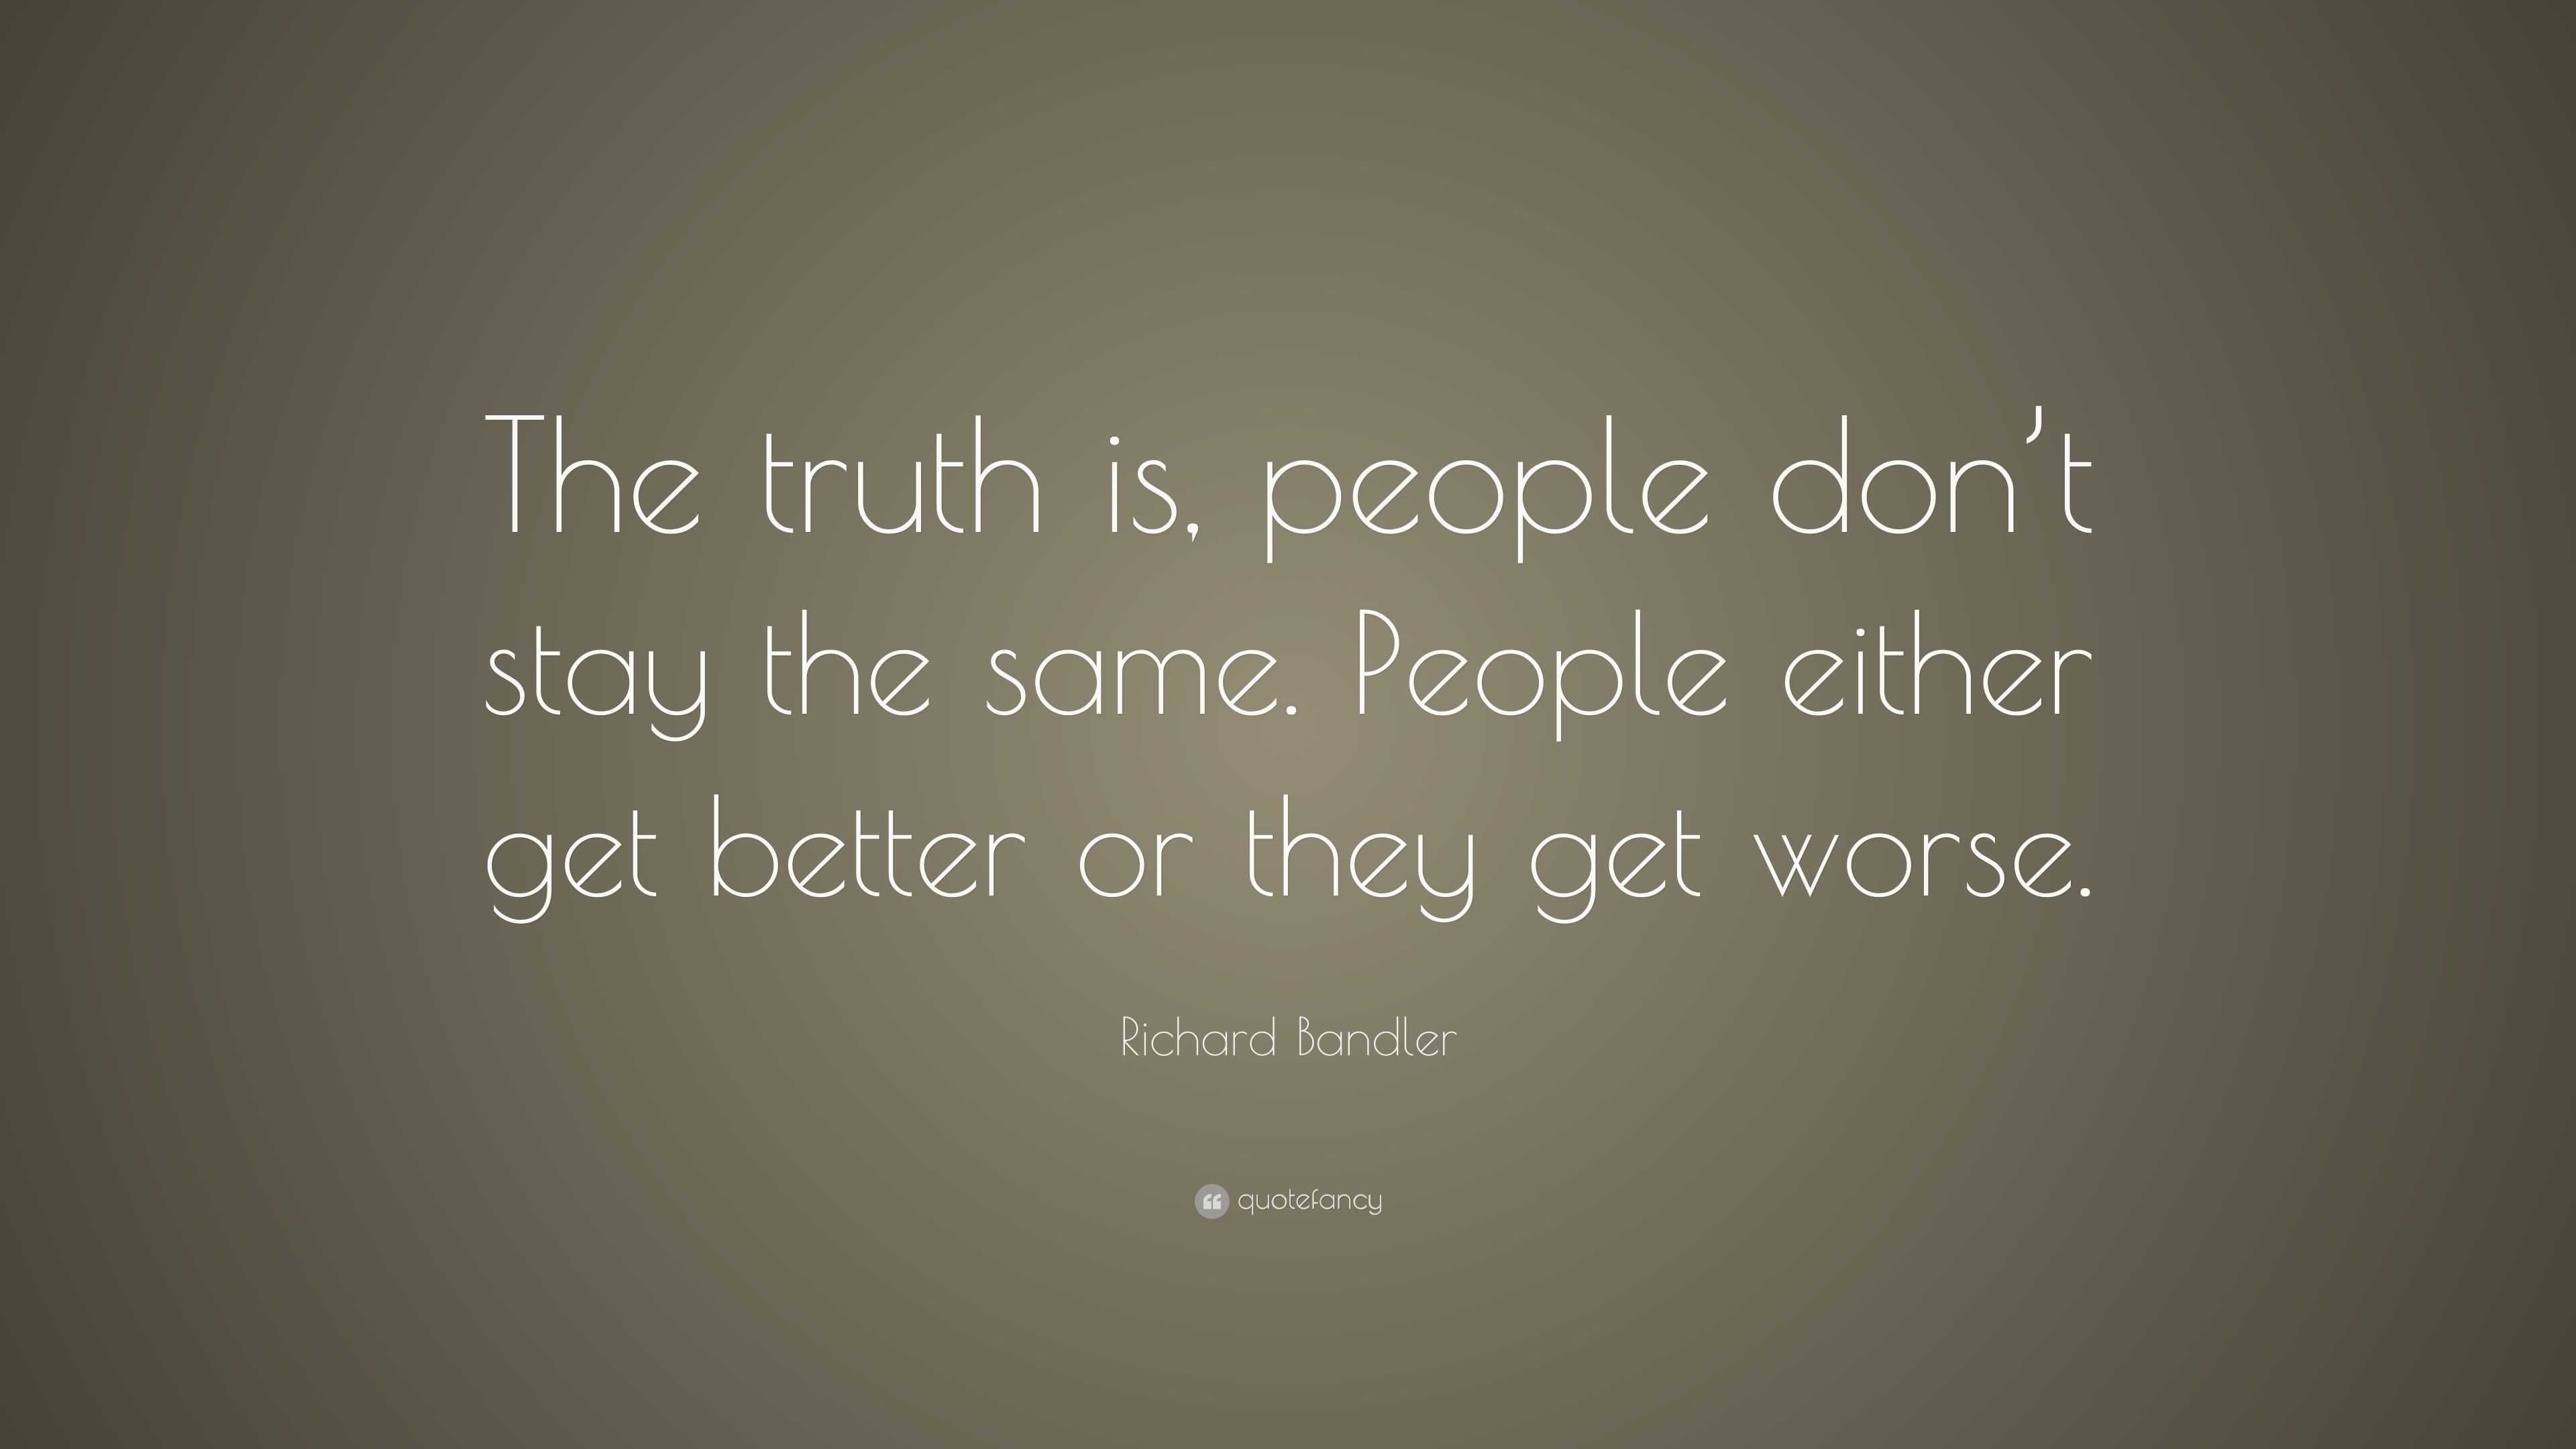 Richard Bandler Quote: “The truth is, people don’t stay the same ...